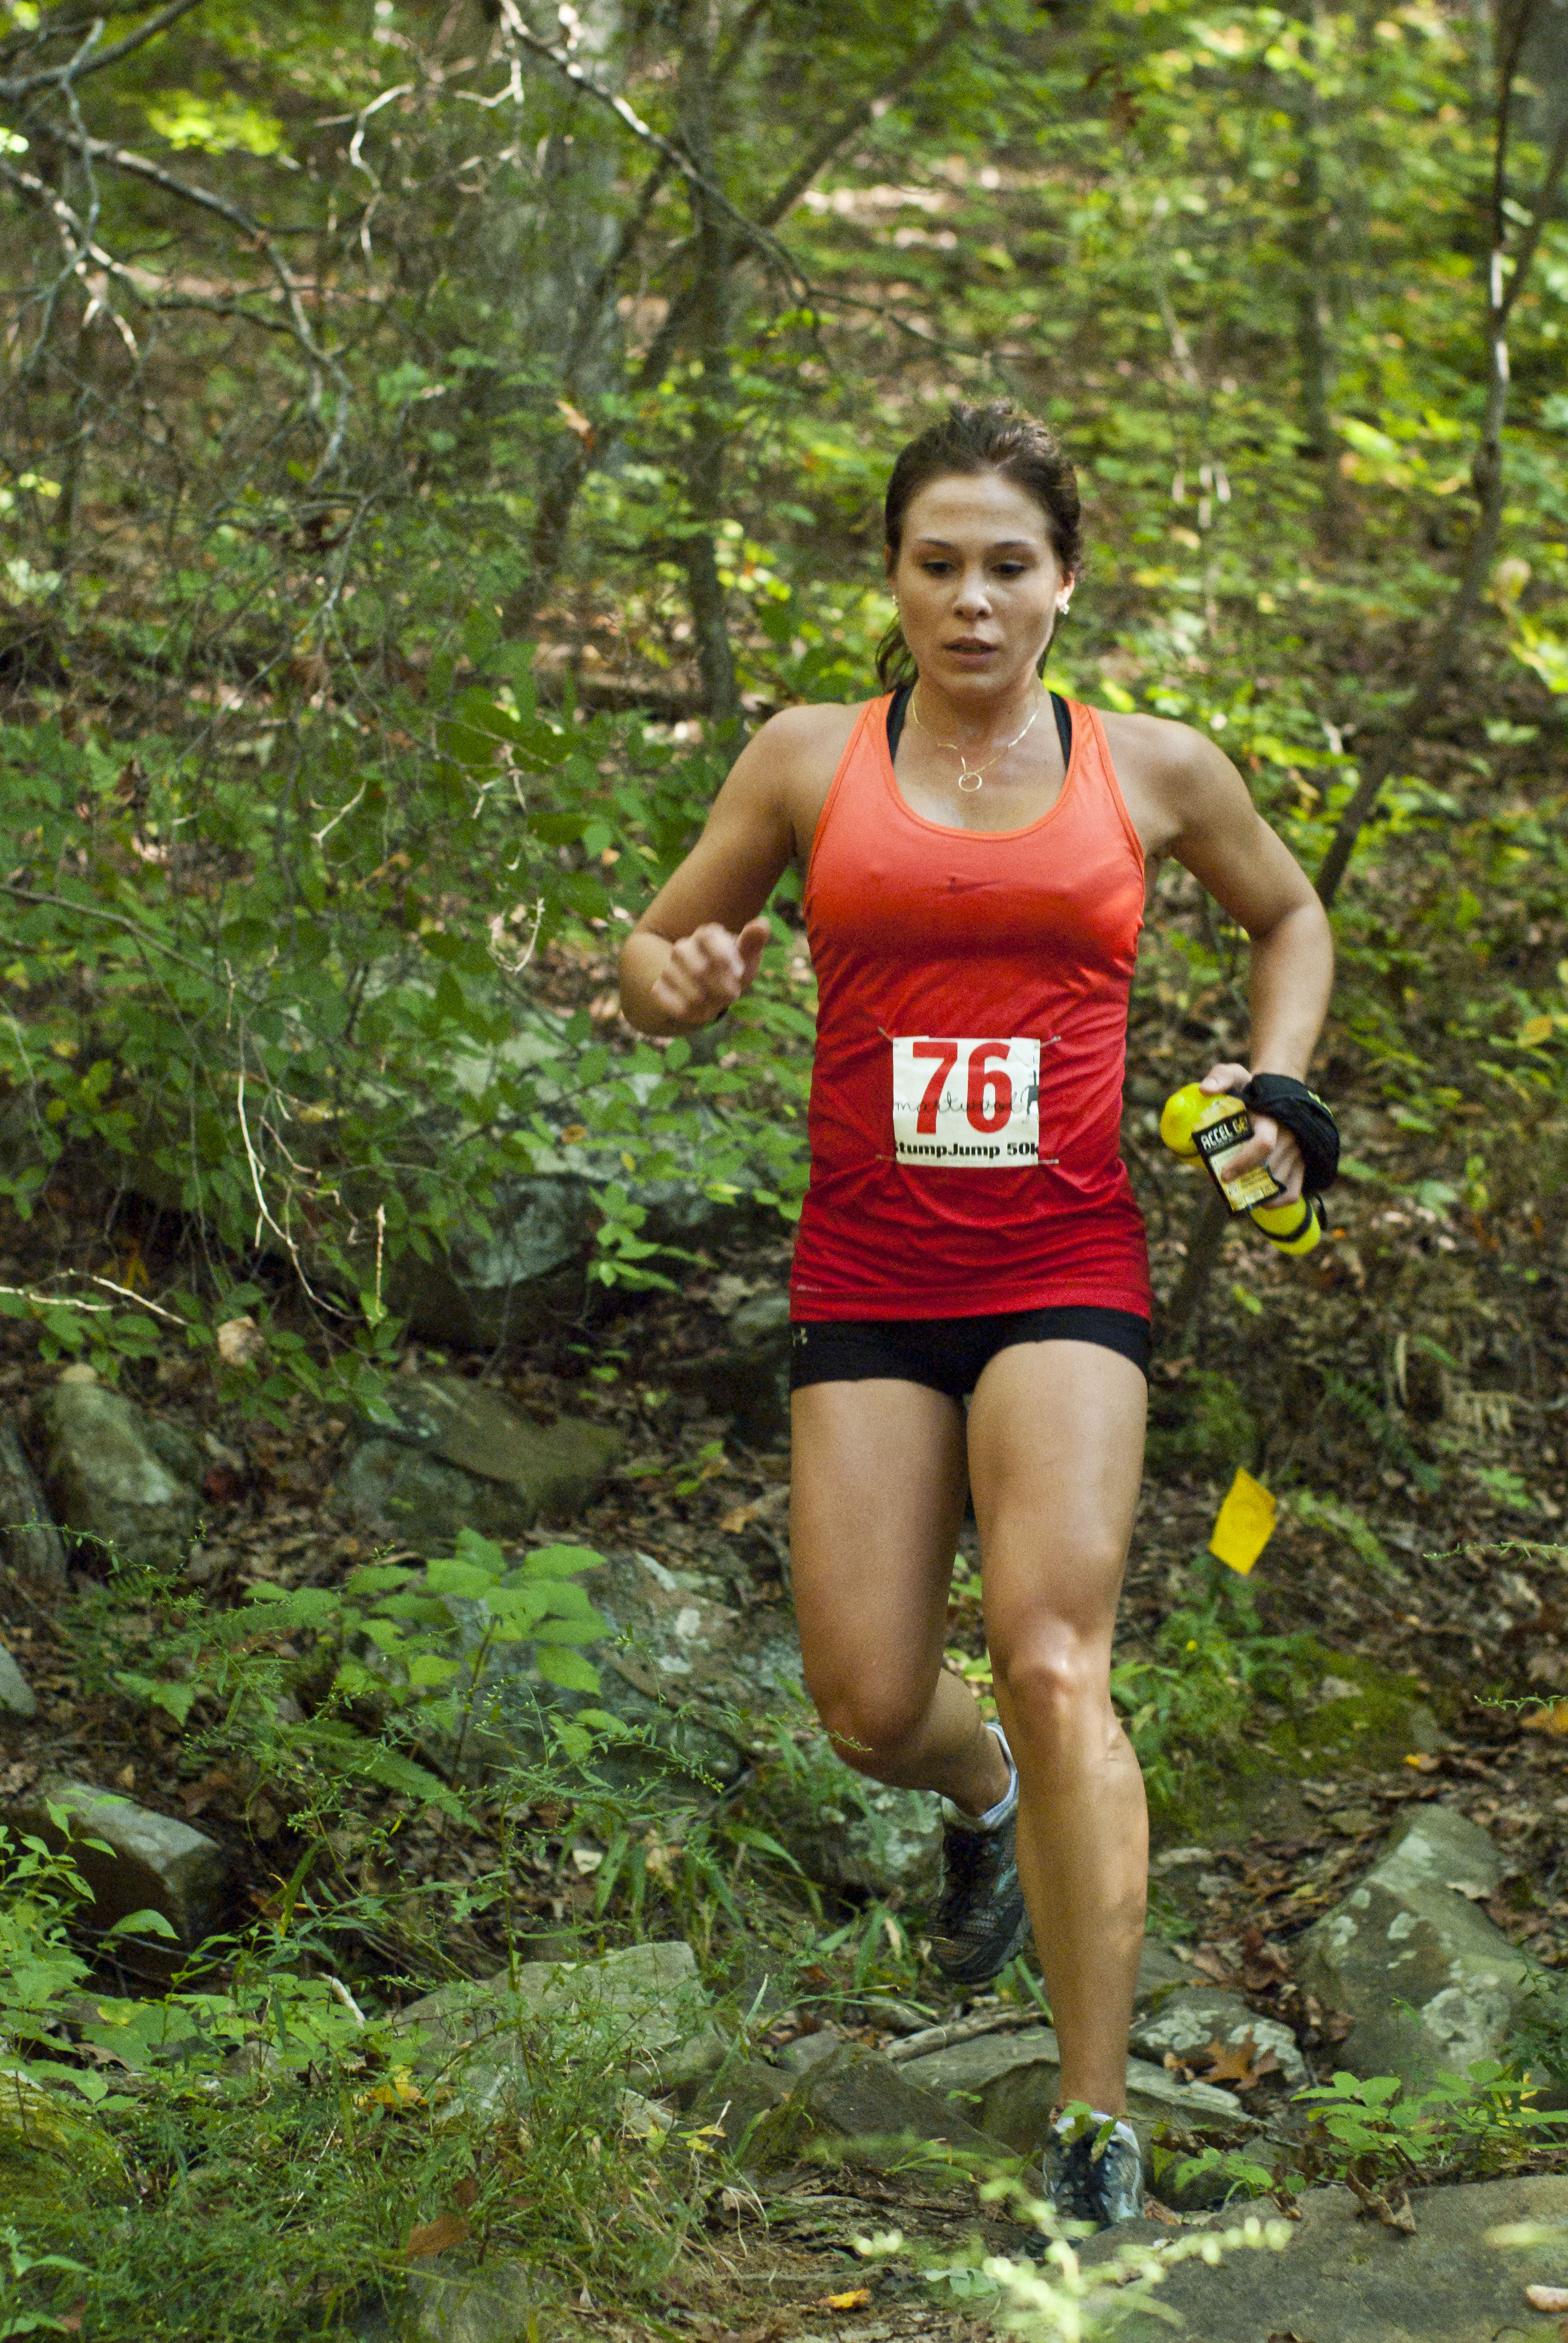 A runner enjoys narrow single track trail typical of this Southeastern trail running series.